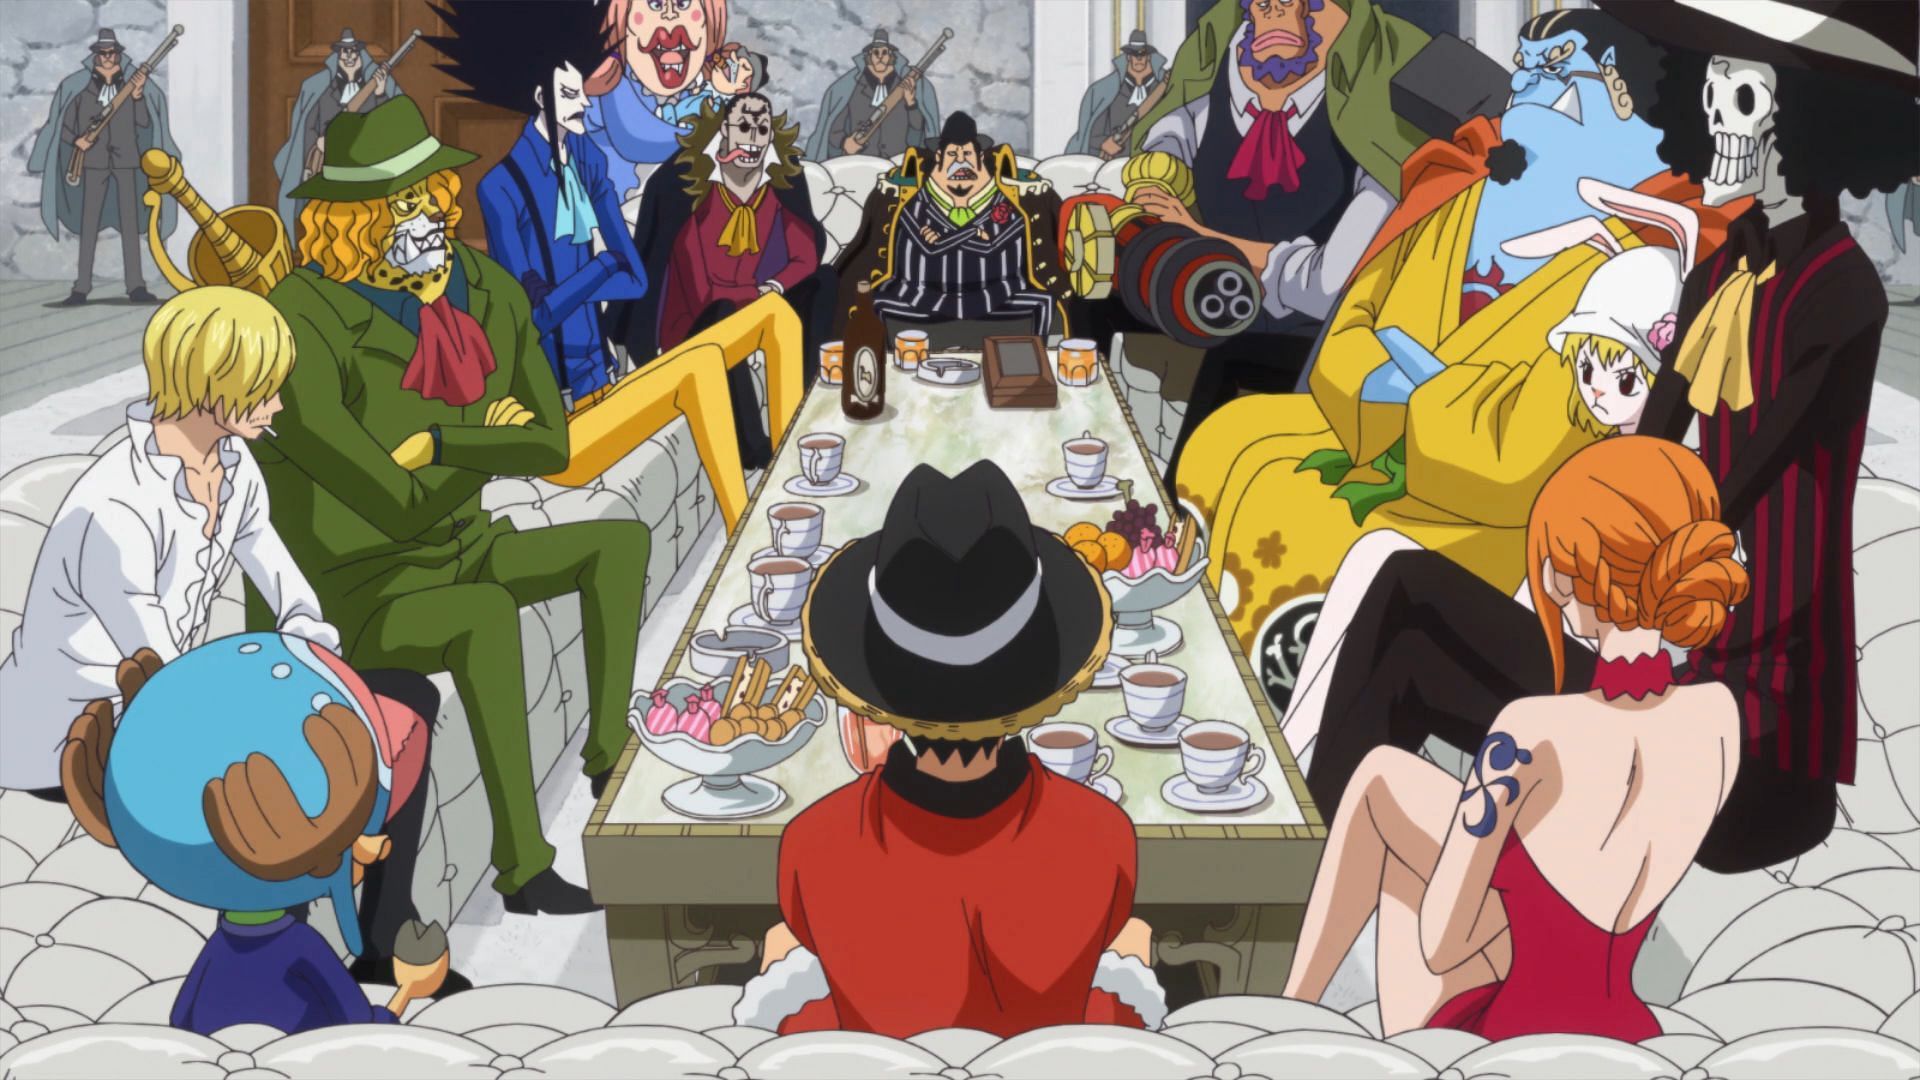 The Whole Cake Island arc sees the Straw Hats get some new allies after splitting their crew in two temporarily (Image via Toei Animation)